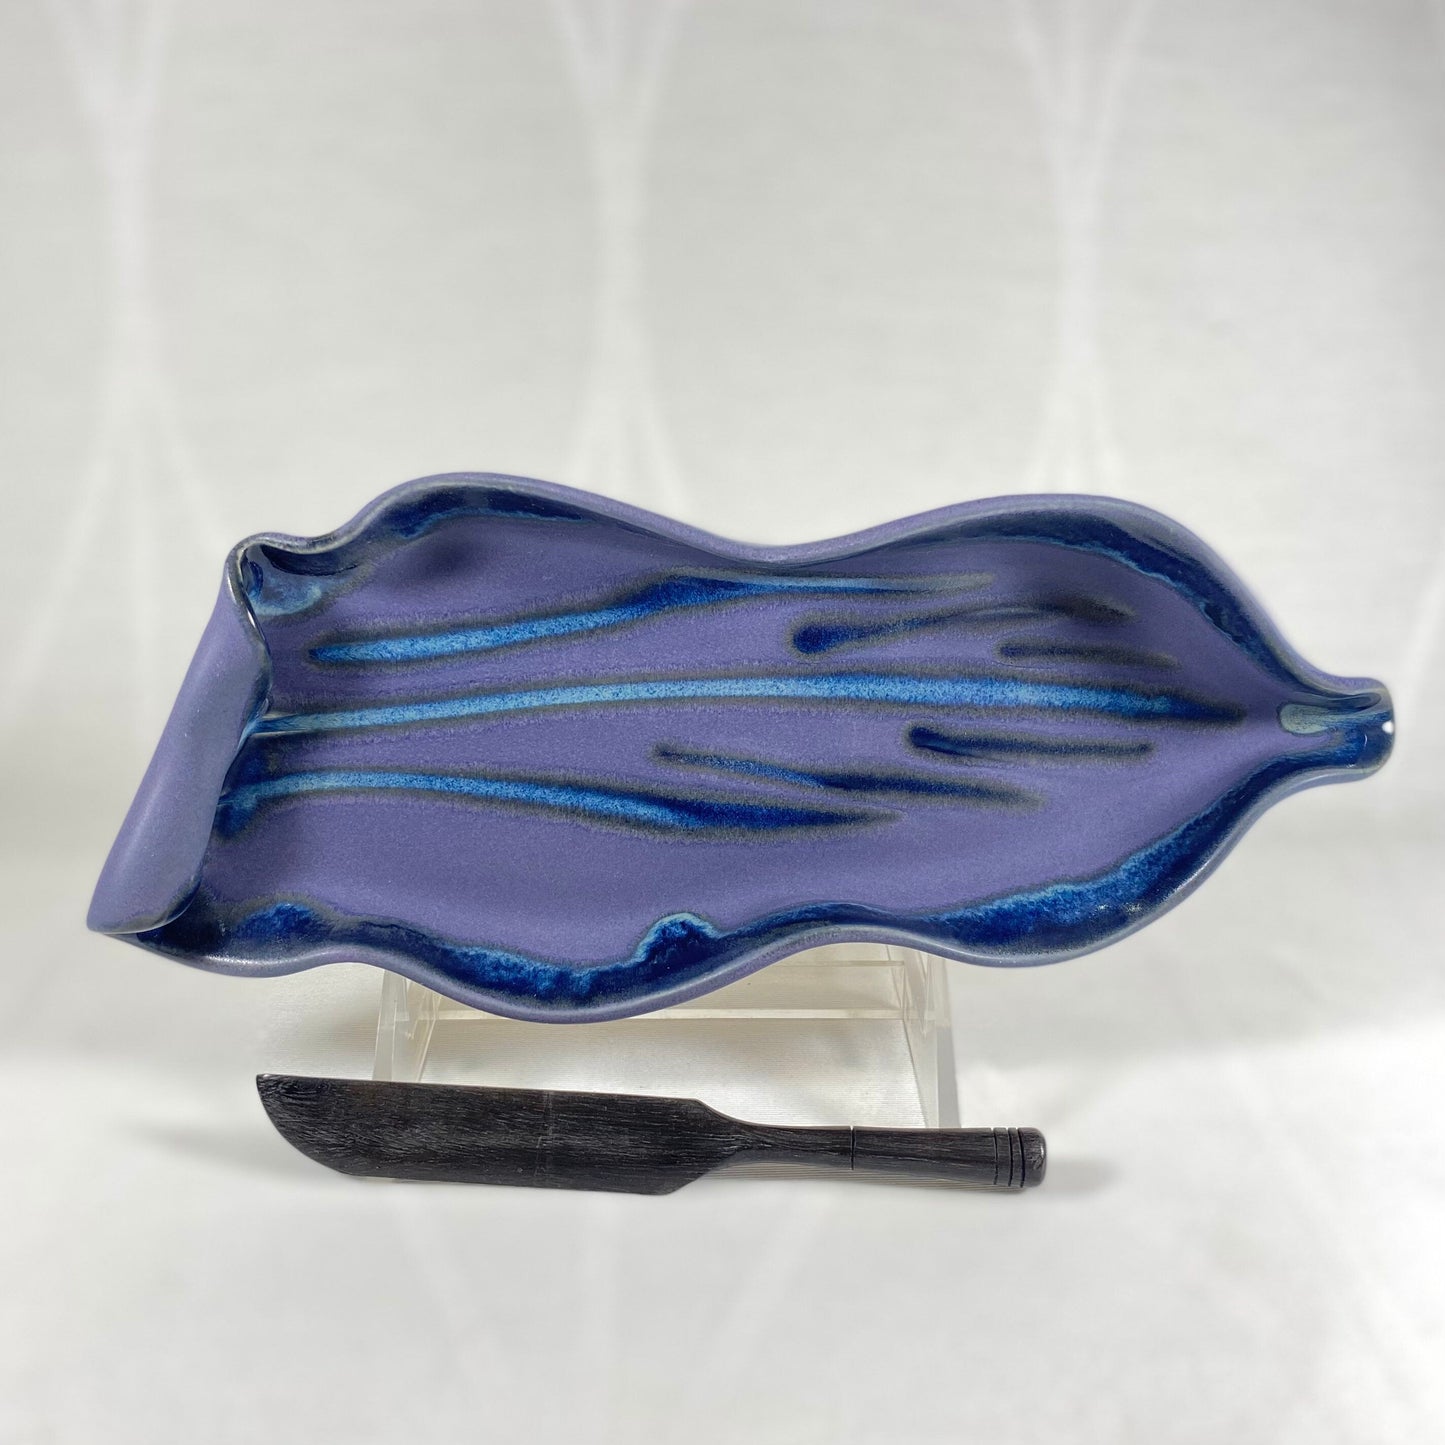 Handmade Purple and Blue Butter Dish with Small Knife, Functional and Decorative Pottery